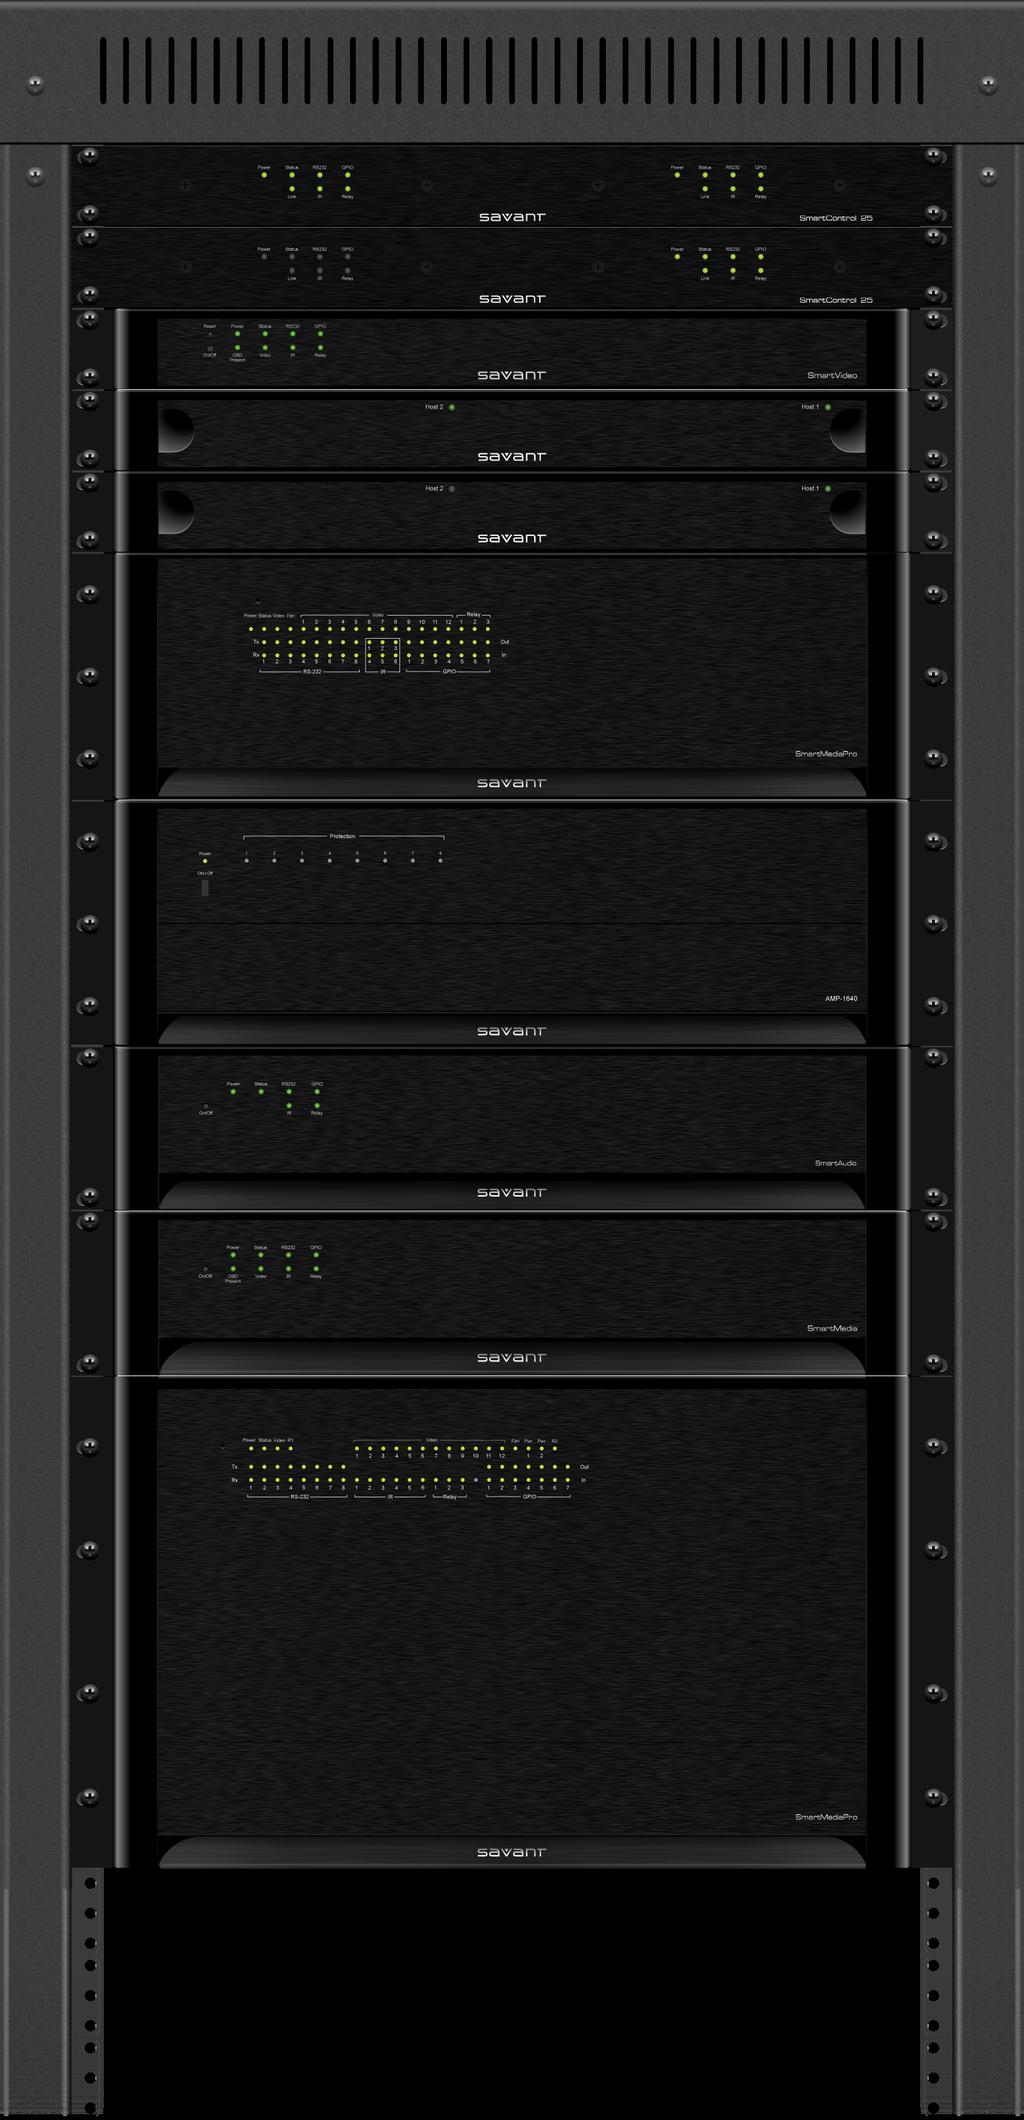 Specifications for Installing Device in Rack The SSA-3000 can be mounted in a U rack style enclosure.